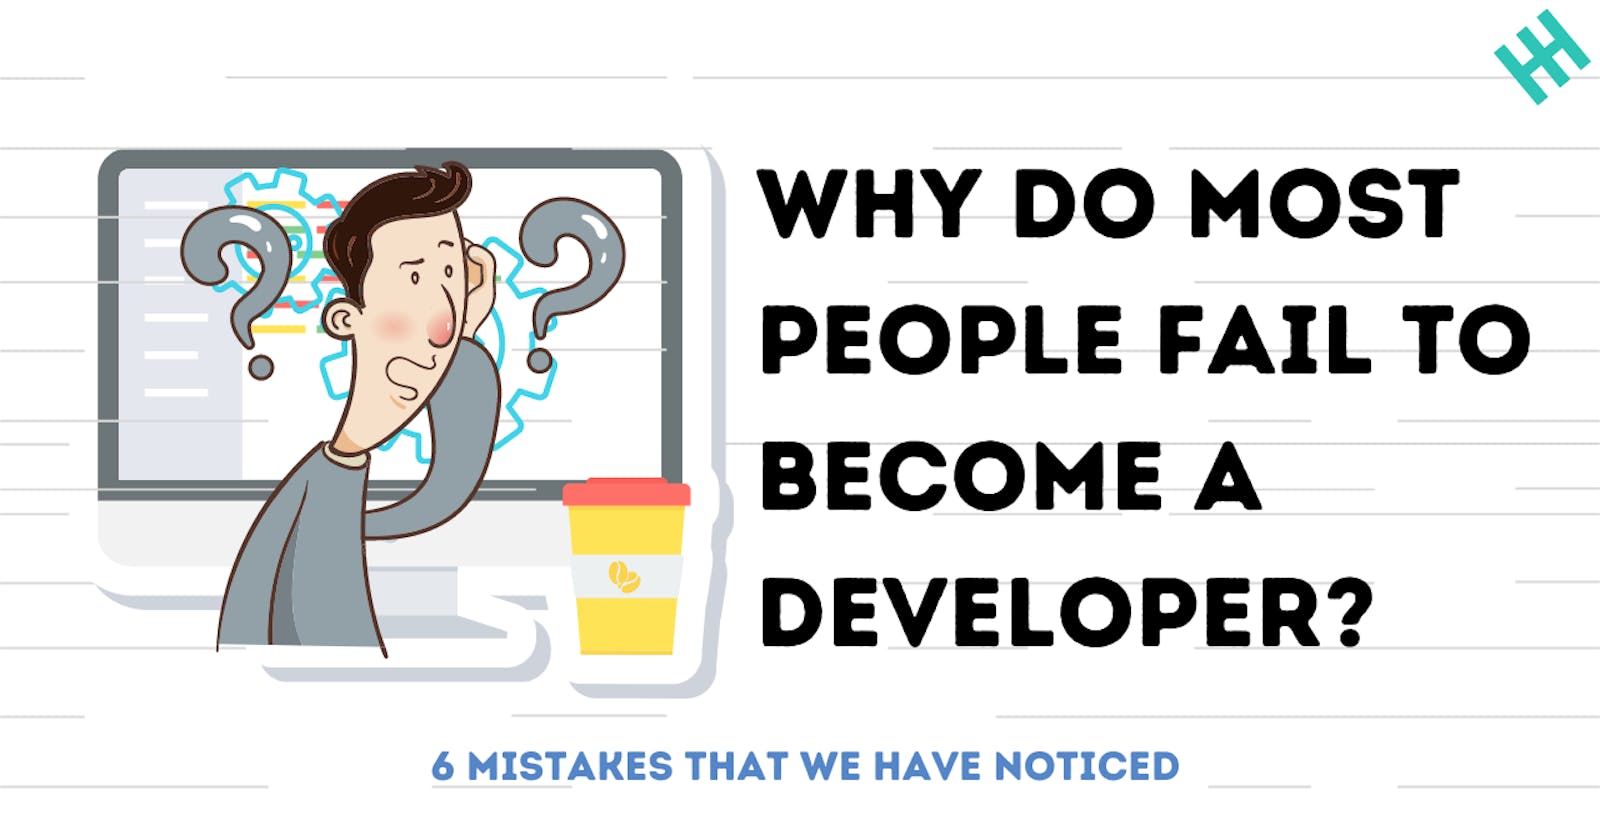 Why Do Most People Fail To Become A Developer: 6 Mistakes That We Have Noticed